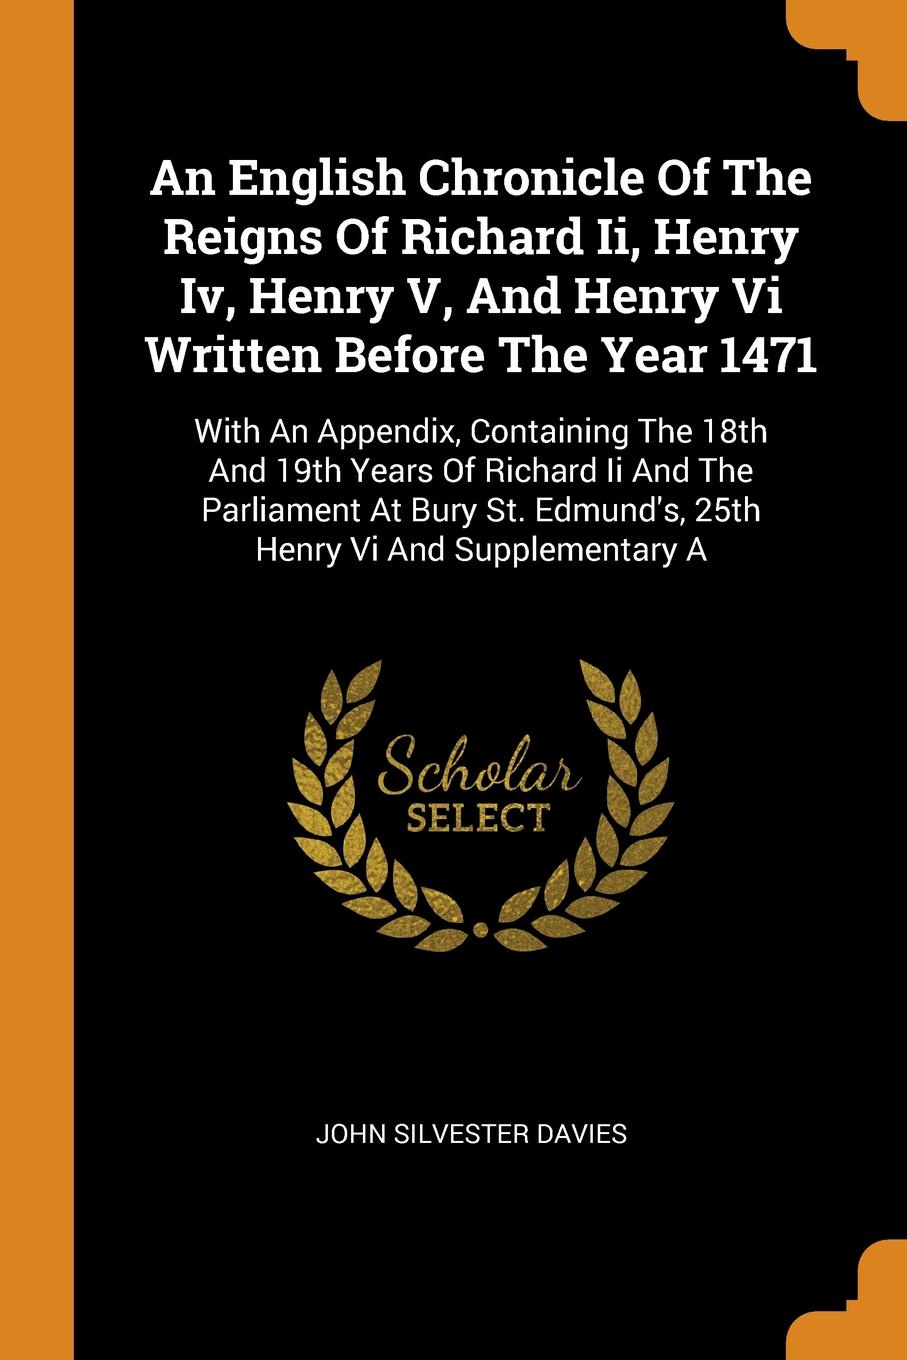 An English Chronicle Of The Reigns Of Richard Ii, Henry Iv, Henry V, And Henry Vi Written Before The Year 1471. With An Appendix, Containing The 18th And 19th Years Of Richard Ii And The Parliament At Bury St. Edmund`s, 25th Henry Vi And Supplemen...